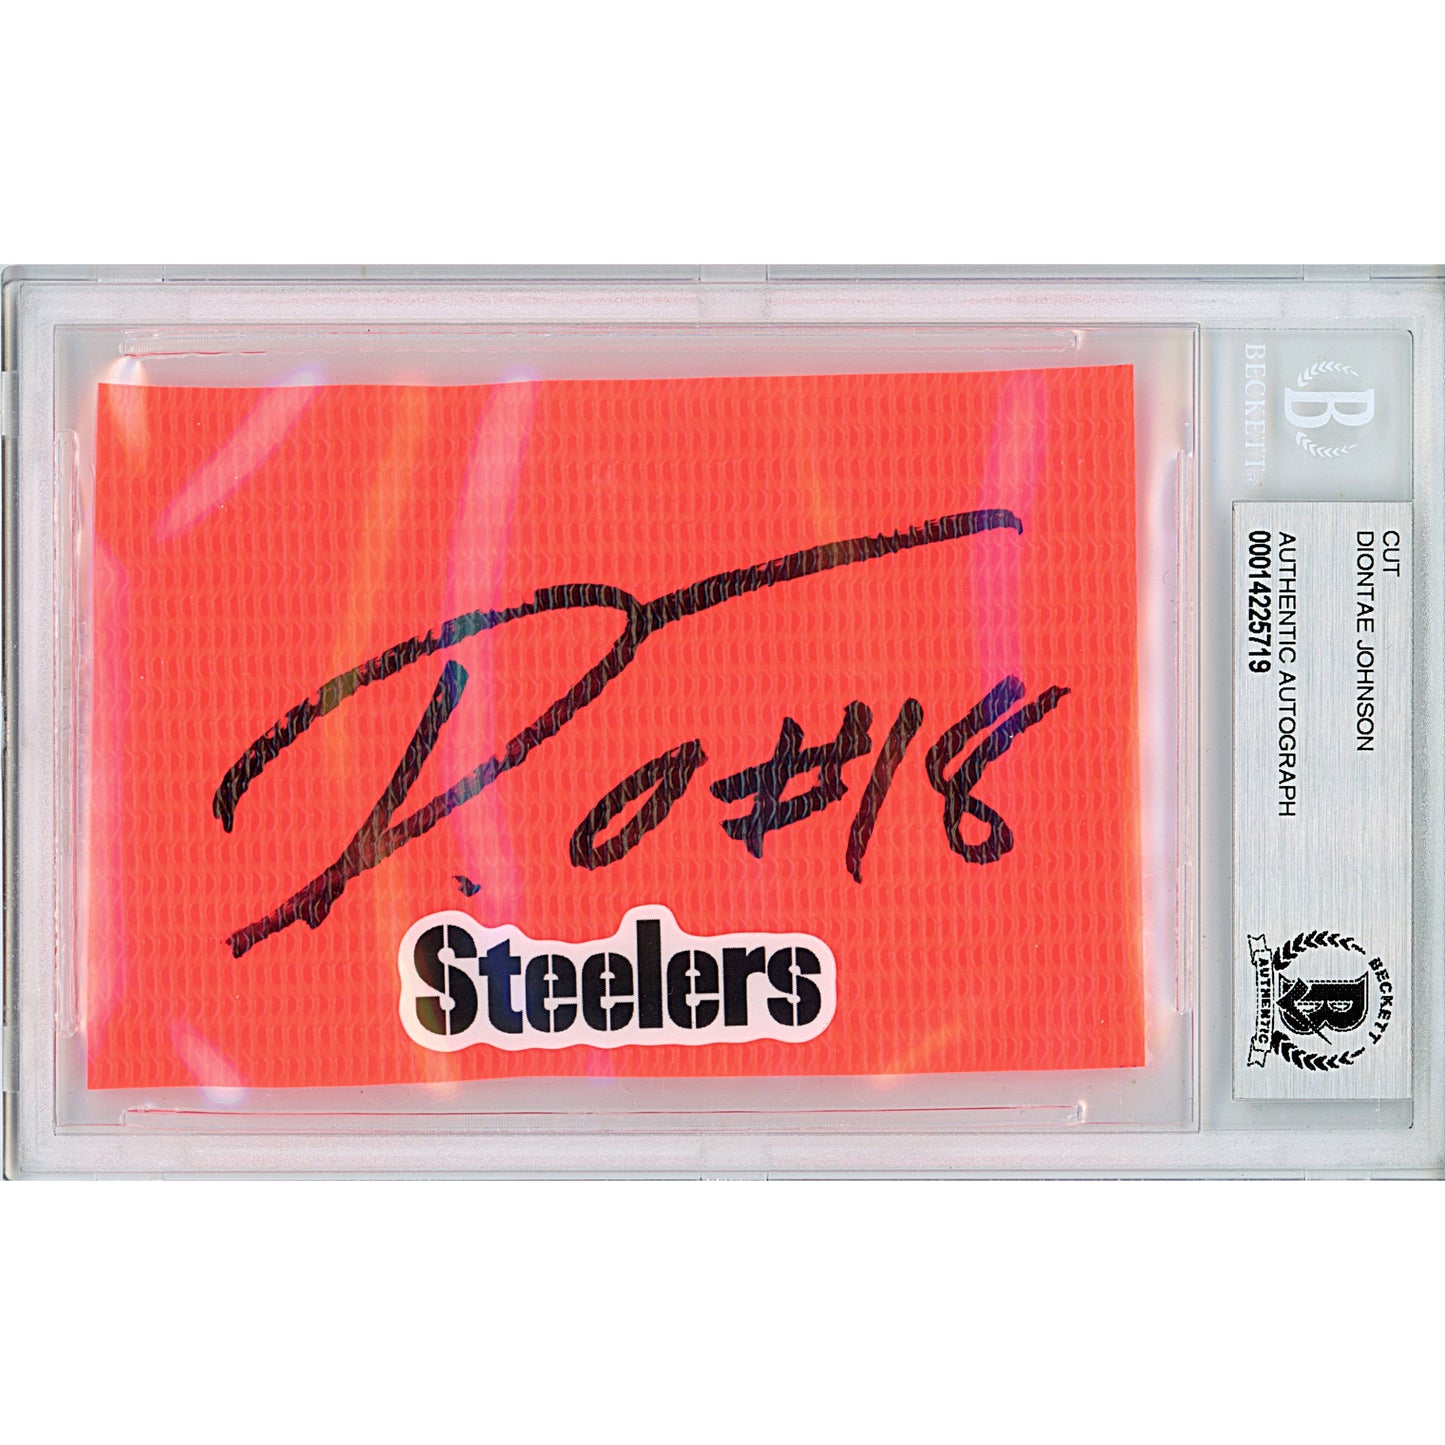 Footballs- Autographed- Diontae Johnson Signed Pittsburgh Steelers Football End Zone Pylon Piece Beckett BAS Slabbed 00014225719 - 101